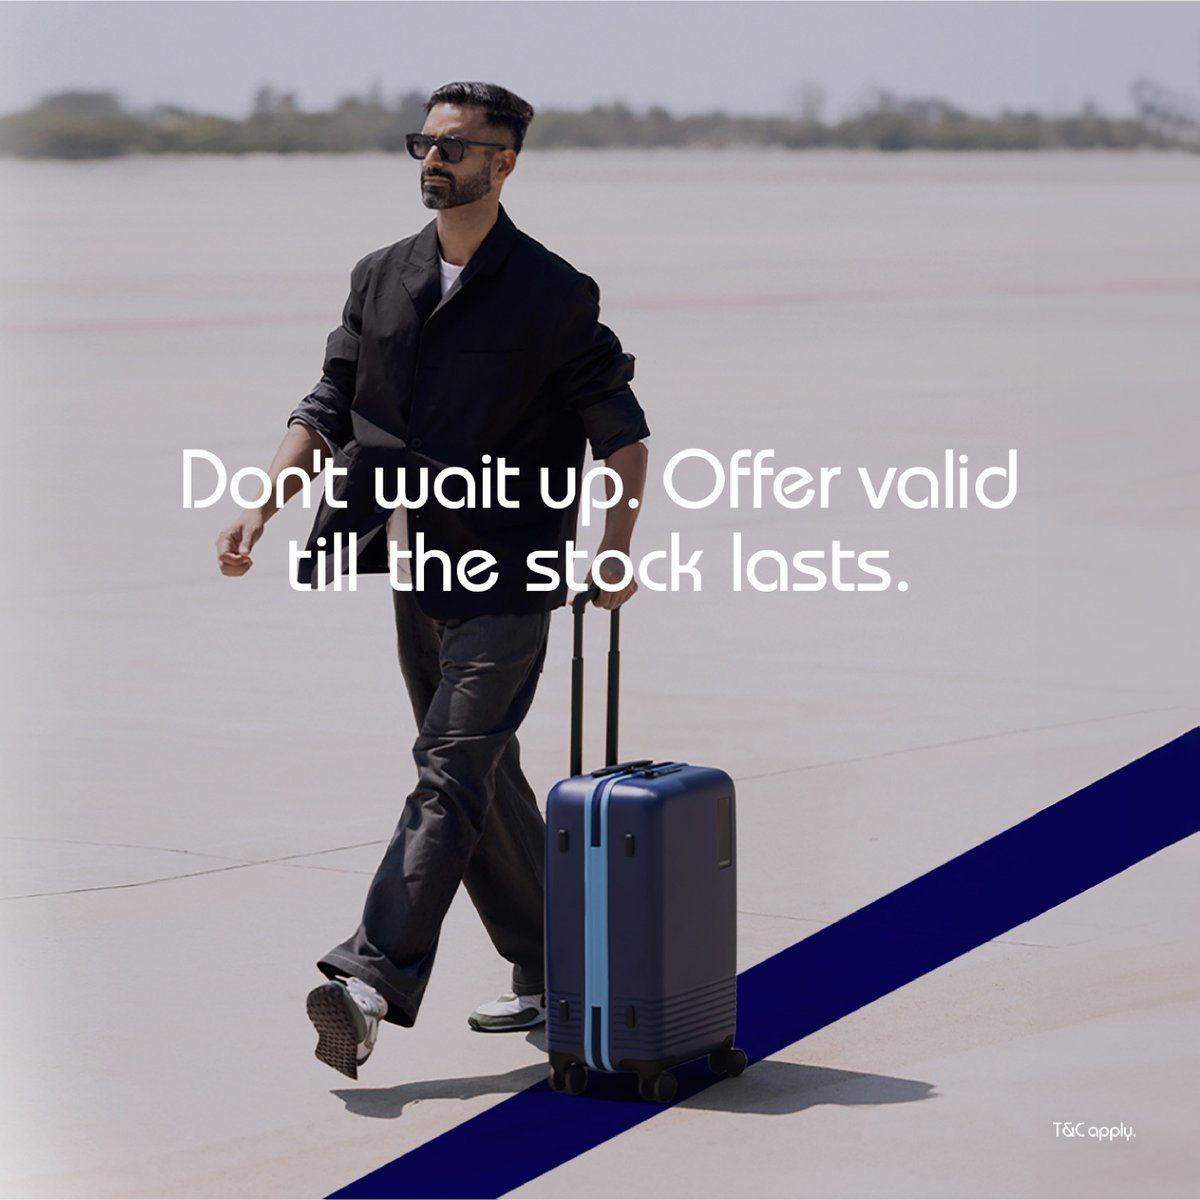 The first-ever Moko 6E Day is live. Enjoy 15% off till stocks last with code MOKO6E15. With your Moko 6E luggage, you can fly with IndiGo with extra 2kg allowance and make heads turn with our free personalisation options. Shop Now bit.ly/3Up4Nwe #goIndiGo #Moko6EDay